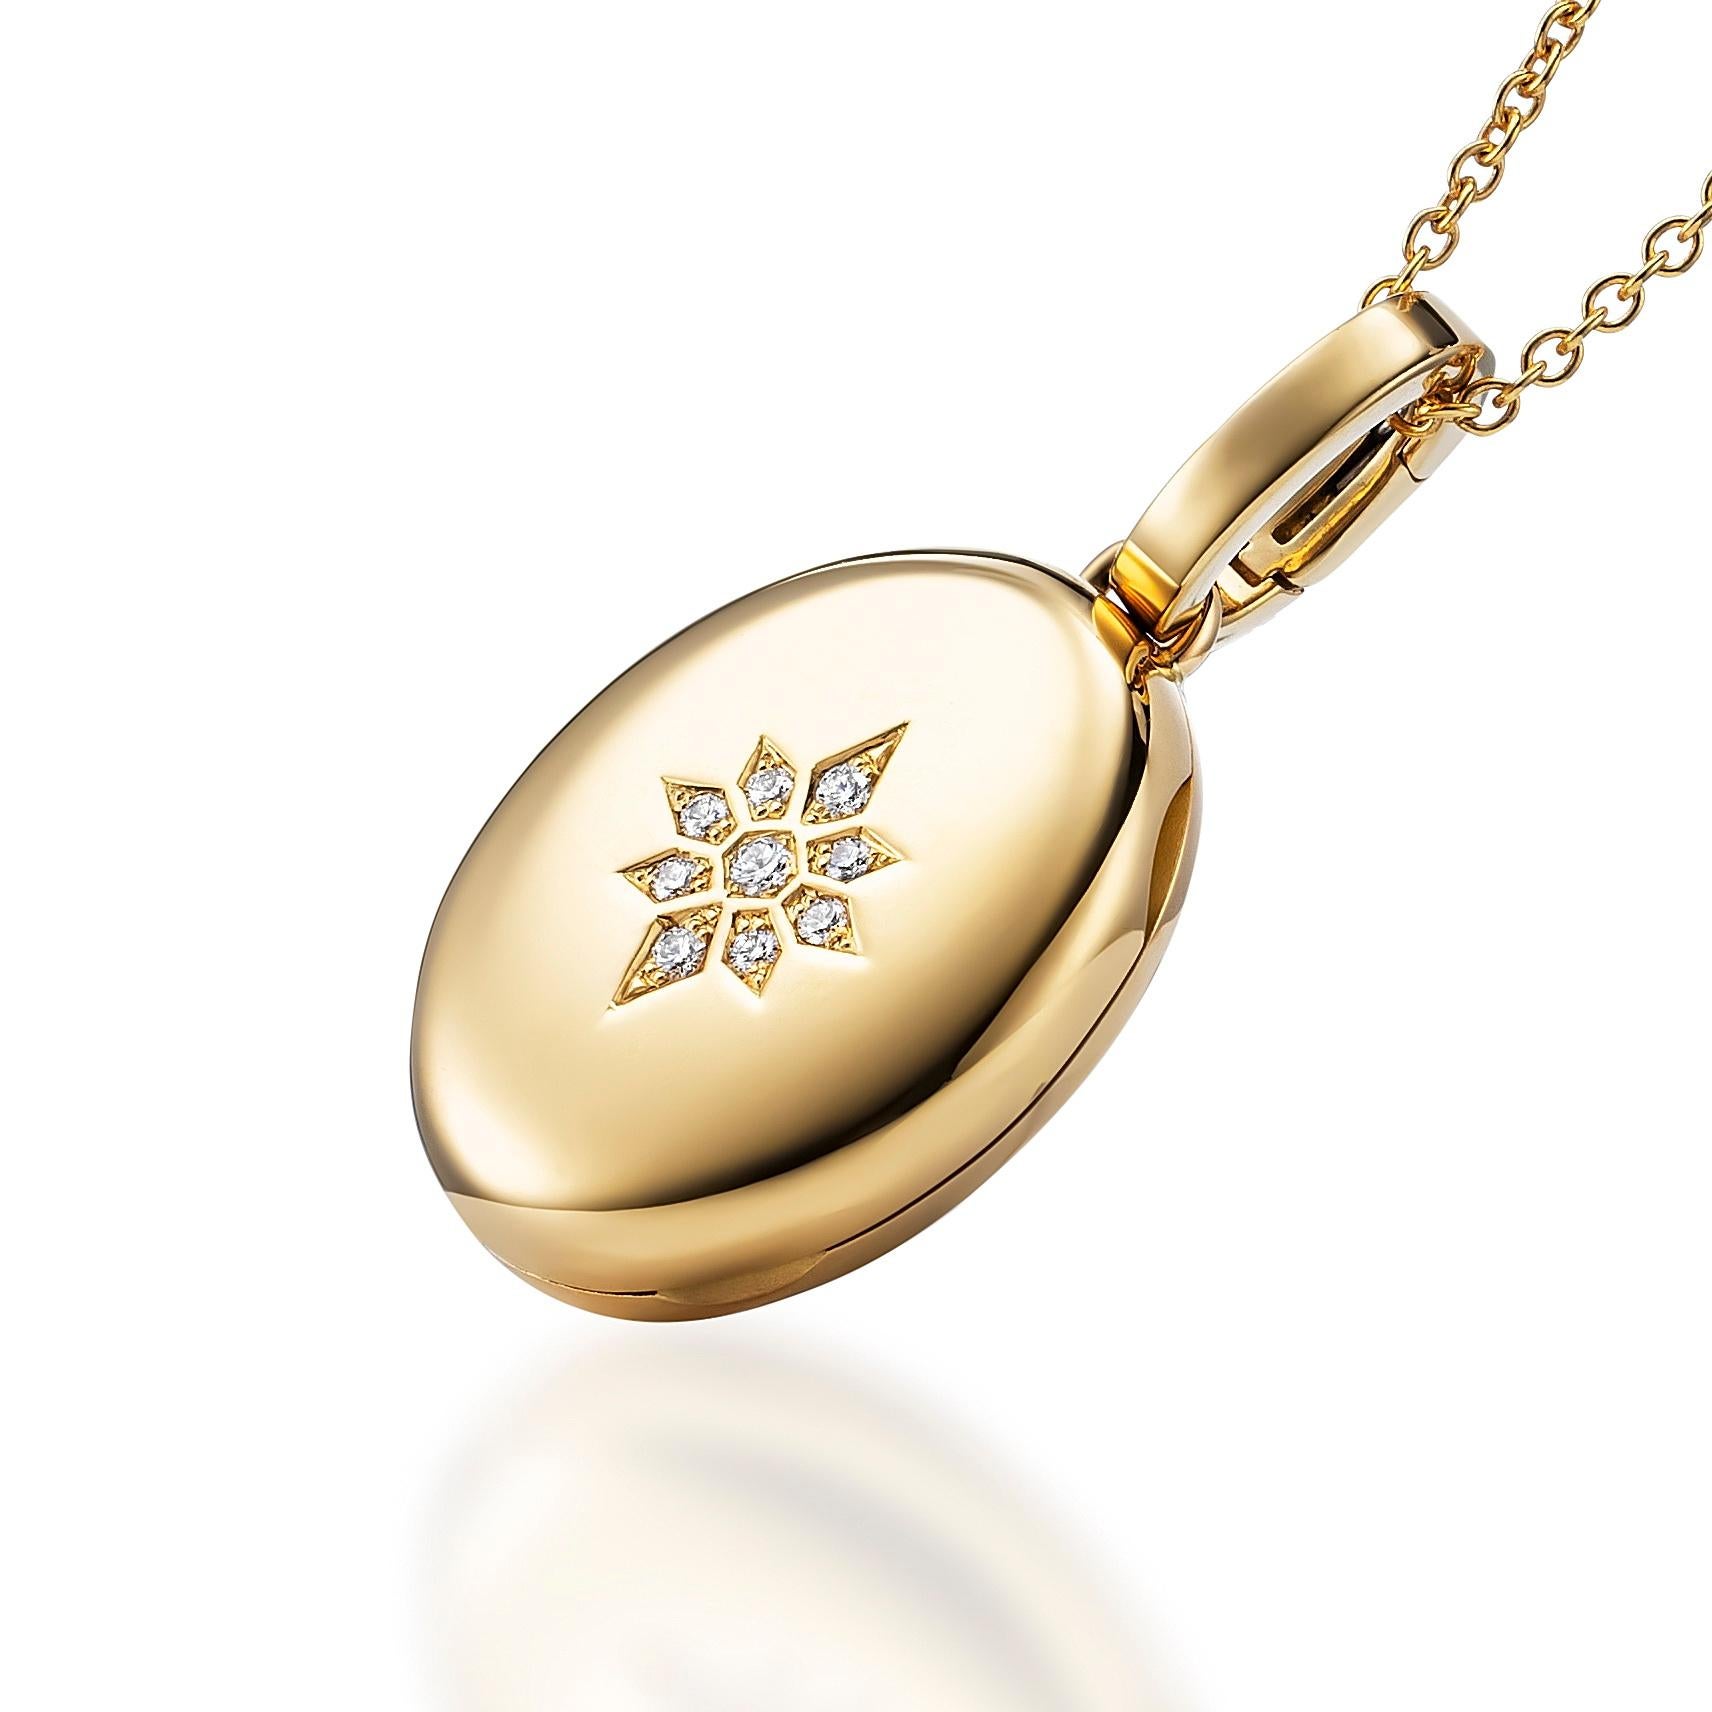 Oval locket pendant 18k yellow gold, with a total of 14 g, particularly heavy and highly valuable manufacture, Victoria Collection, star motif with 9 diamonds total 0.07 ct, G VS, brilliant cut, measurements app. 20.0 mm x 15.0 mm

About the creator